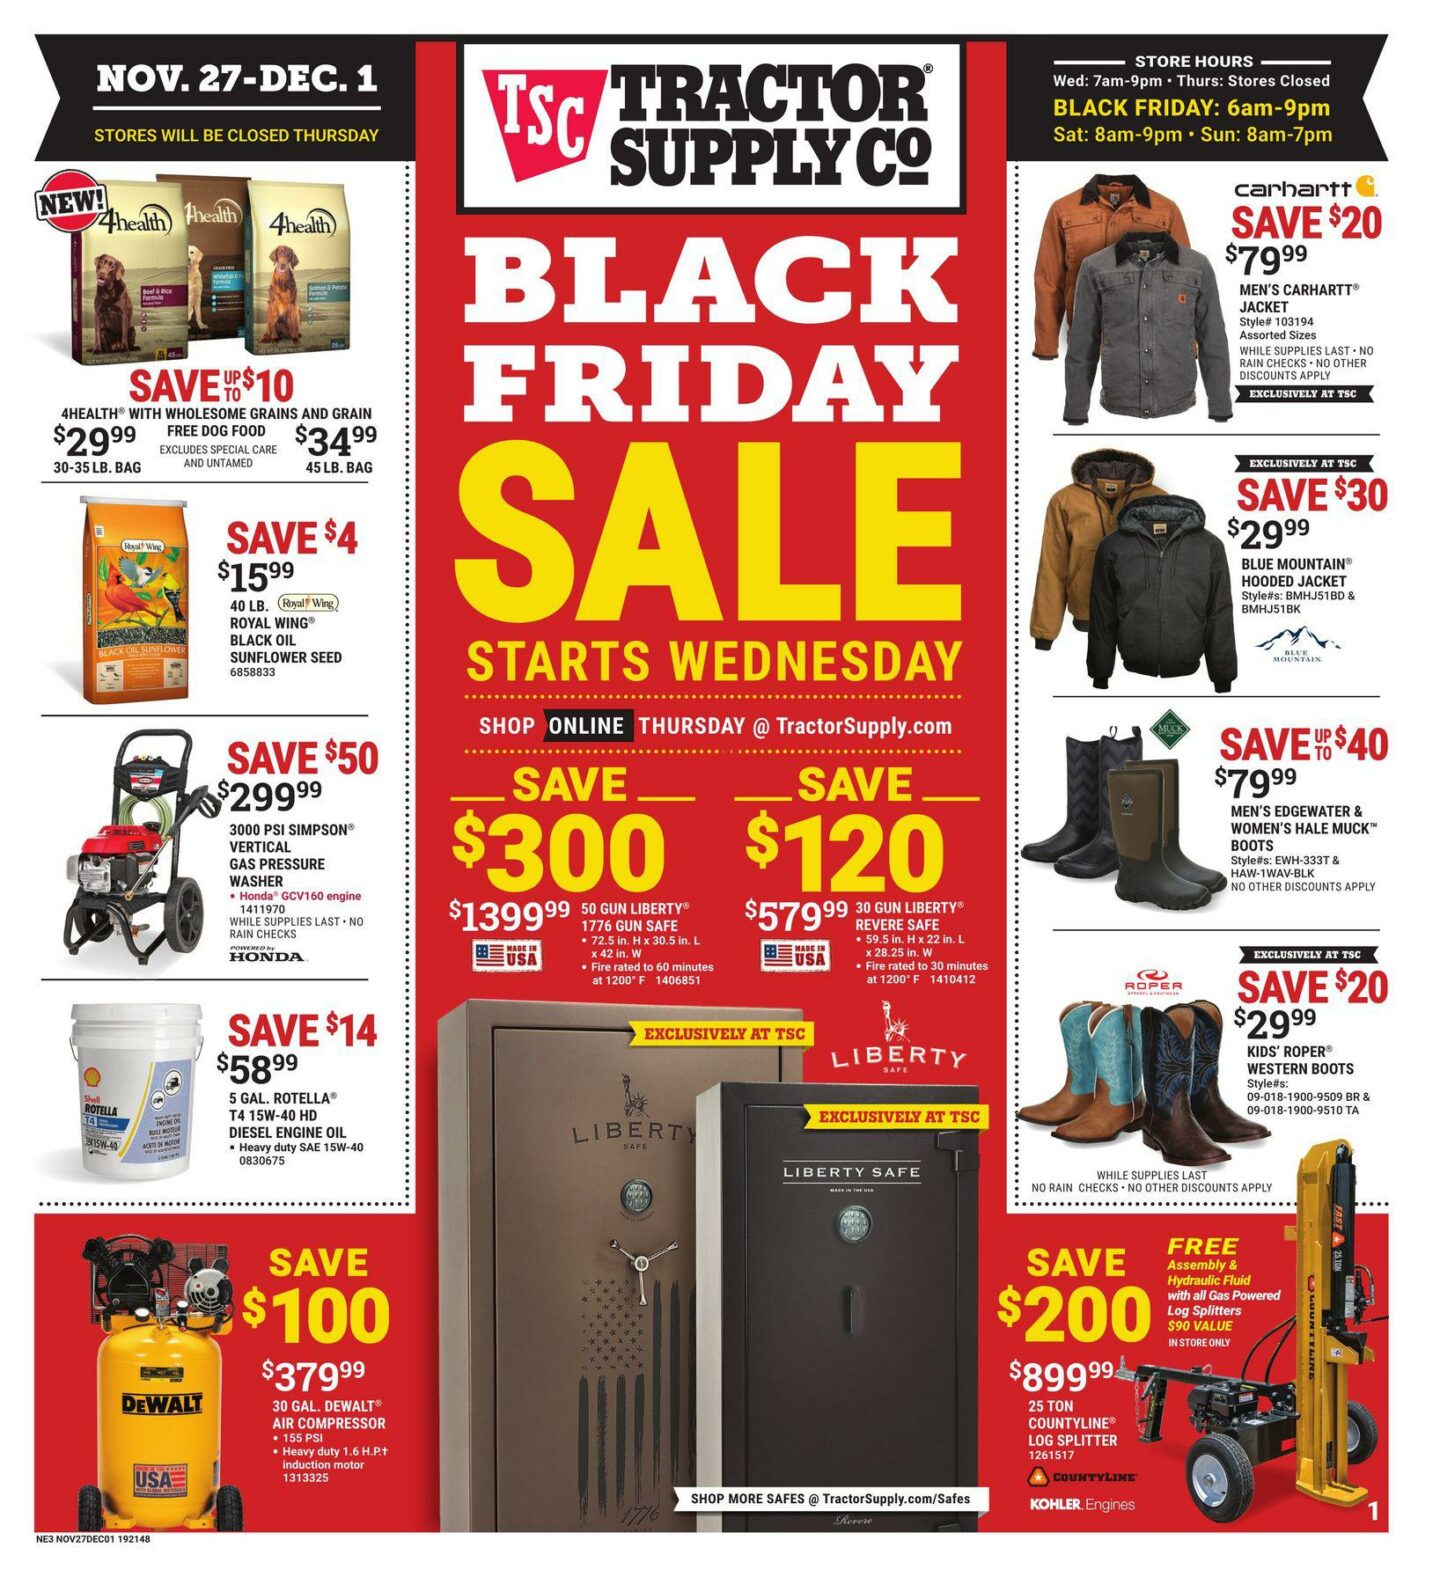 Tractor Supply Black Friday 2019 Ad Sale